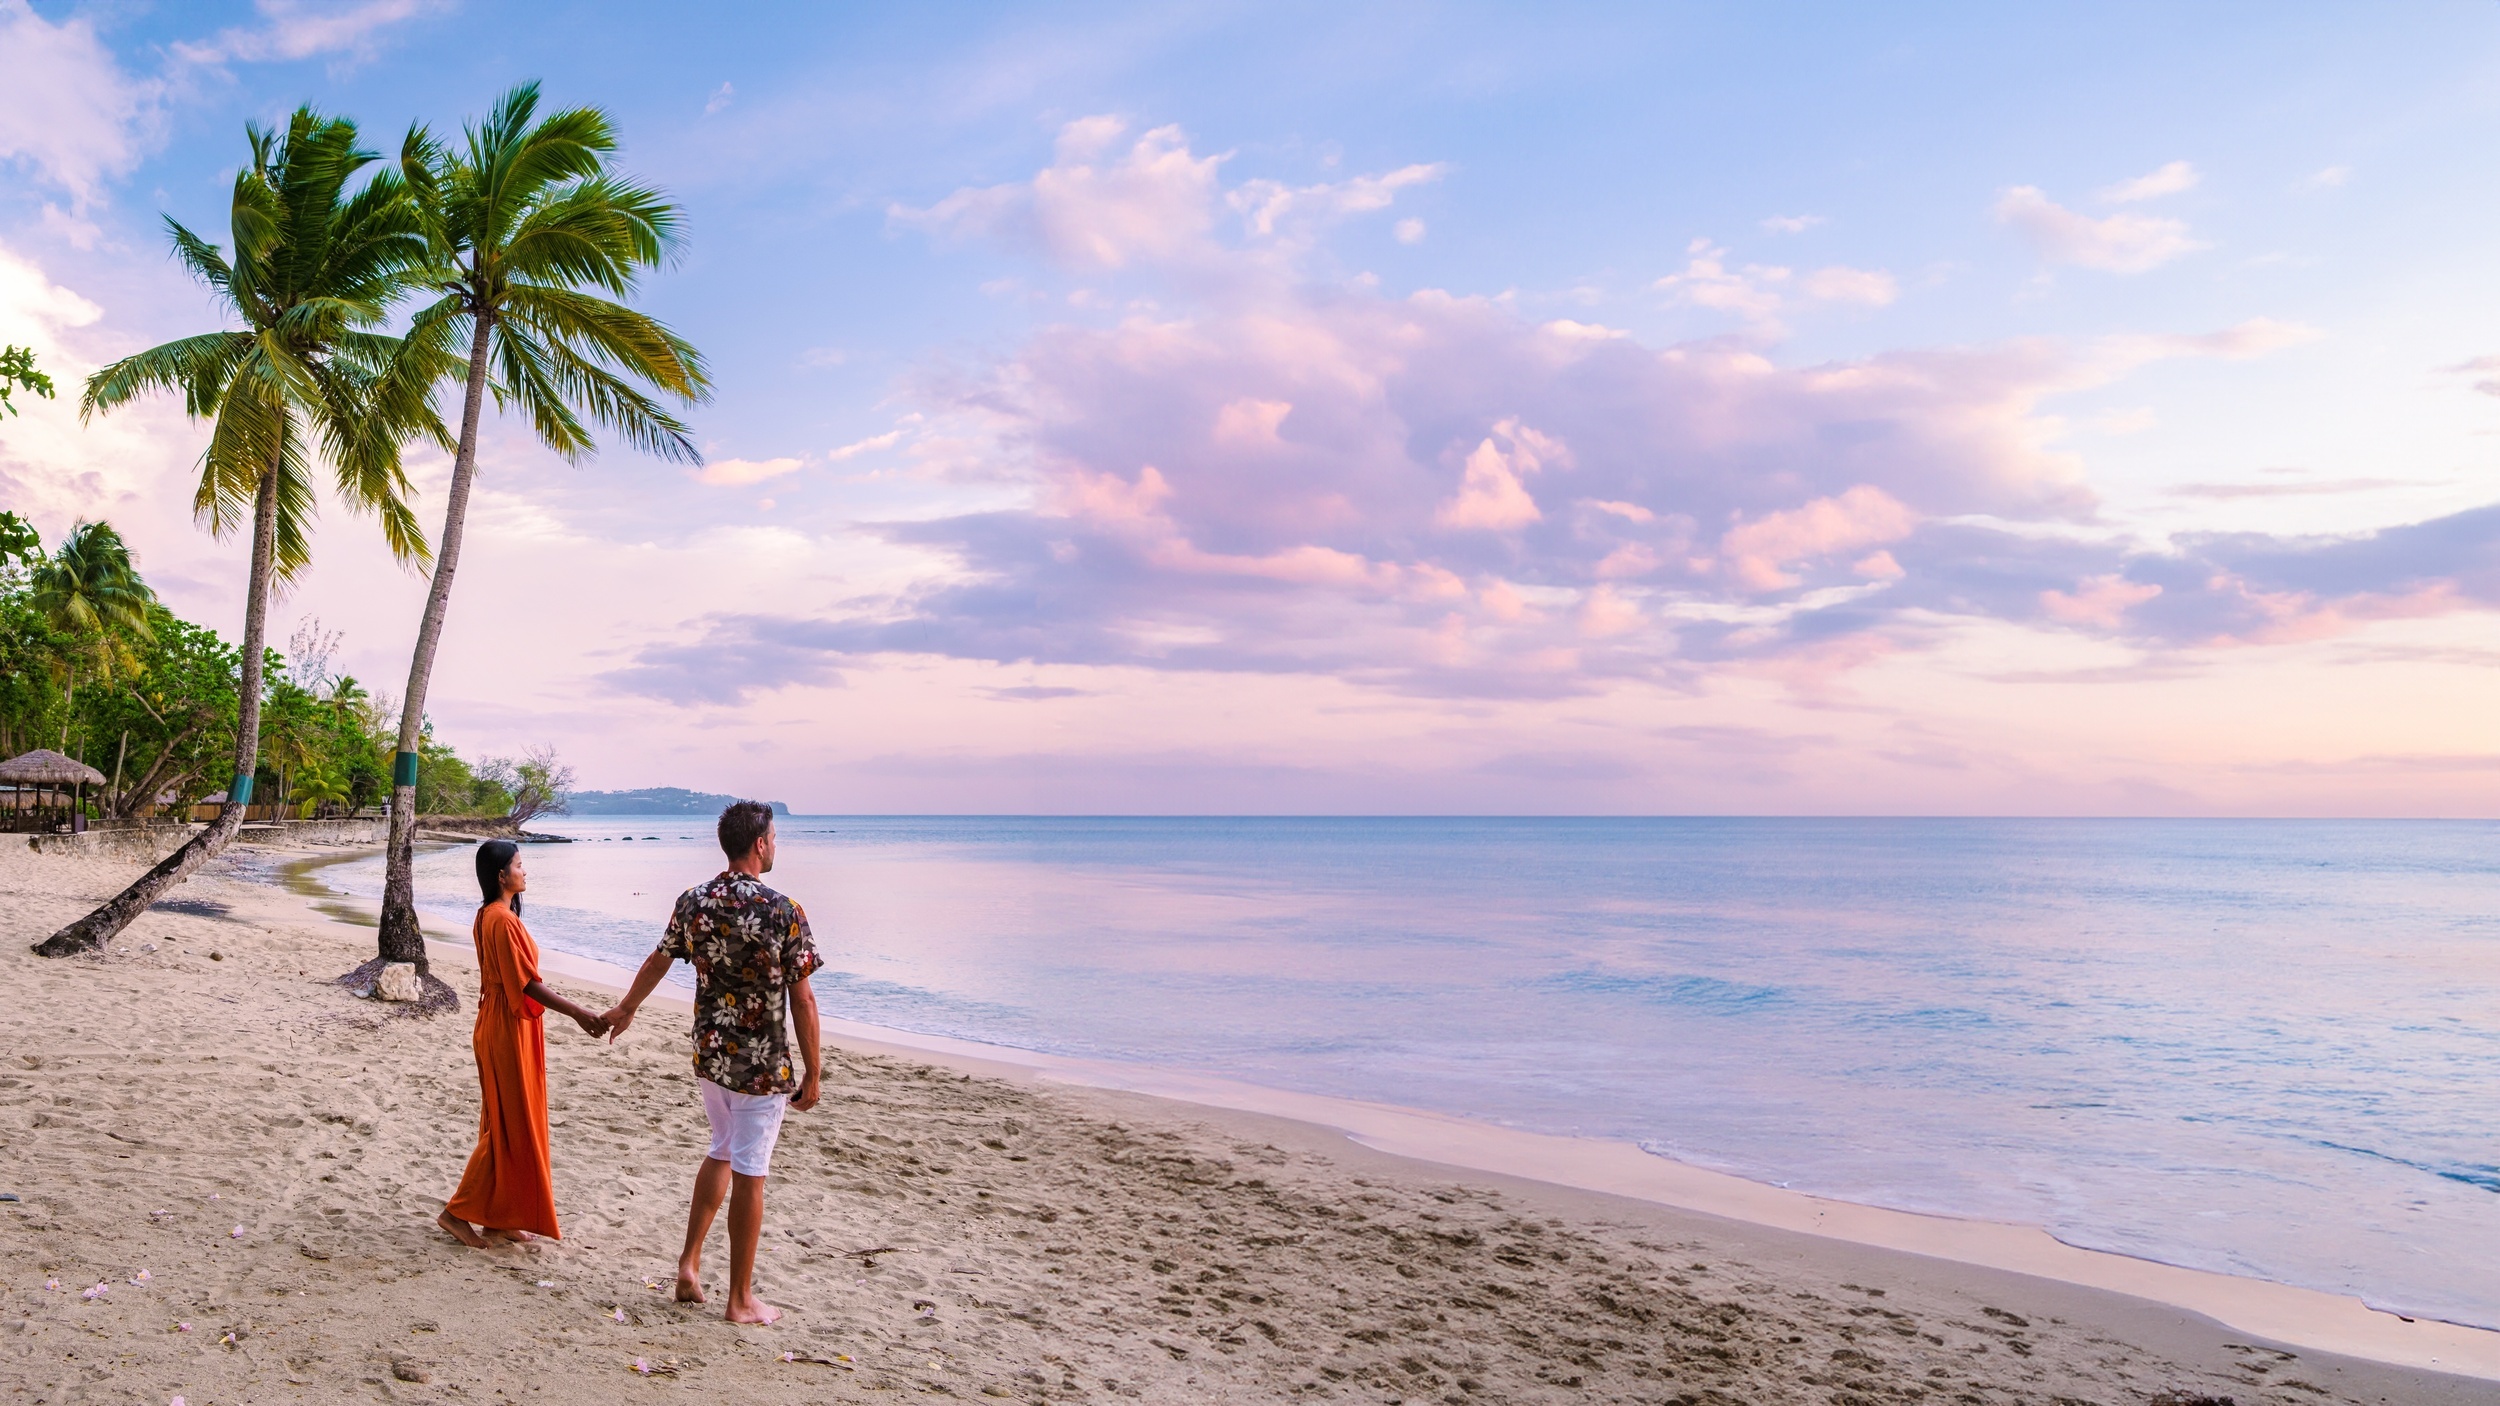 <p>A quick flight from most U.S. airports, Saint Lucia certainly feels a world away. The hidden beaches formed by volcanic explosions lifetimes ago and verdant jungles await you. Plus, the tropical climate means you’ll always have great weather.</p><p><a href='https://www.msn.com/en-us/community/channel/vid-cj9pqbr0vn9in2b6ddcd8sfgpfq6x6utp44fssrv6mc2gtybw0us'>Follow us on MSN to see more of our exclusive lifestyle content.</a></p>